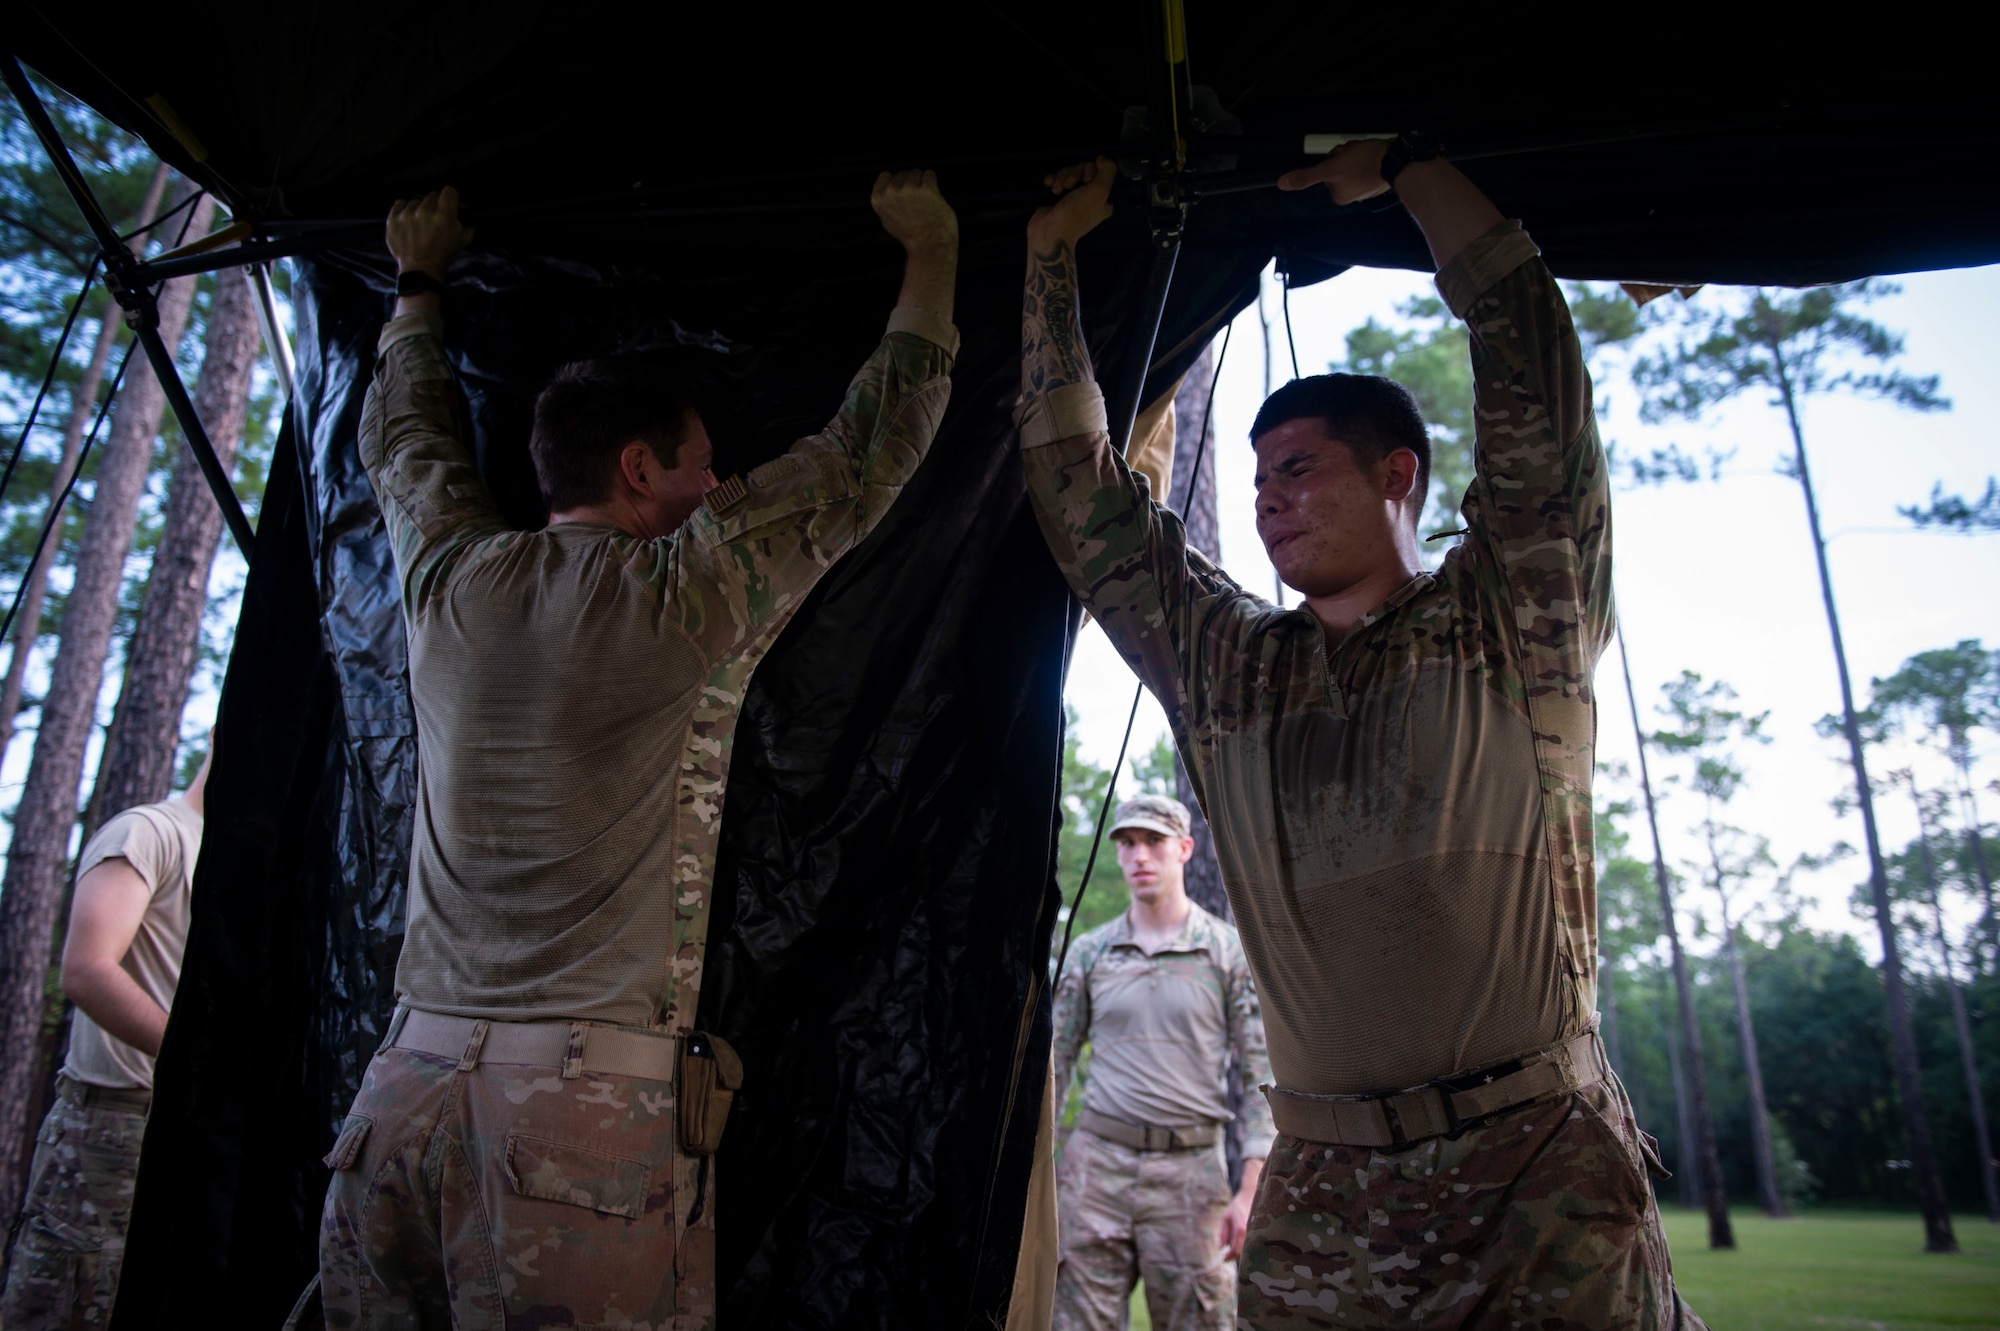 Senior Airman Tristan Wiese, left, 824th Base Defense Squadron (BDS) fire team member, and Senior Airman Fernie Salazar, 824th BDS fire team leader set up a tent during a tactical leaders course, Aug. 10, 2019, at Moody Air Force Base, Ga. The 7-day course revolved around squad leaders developing their skills to effectively communicate, team build and mission plan. These skills were assessed during a 36-hour simulated operation where squad leaders lead Airmen through tactical situations.  (U.S. Air Force photo by Airman Azaria E. Foster)